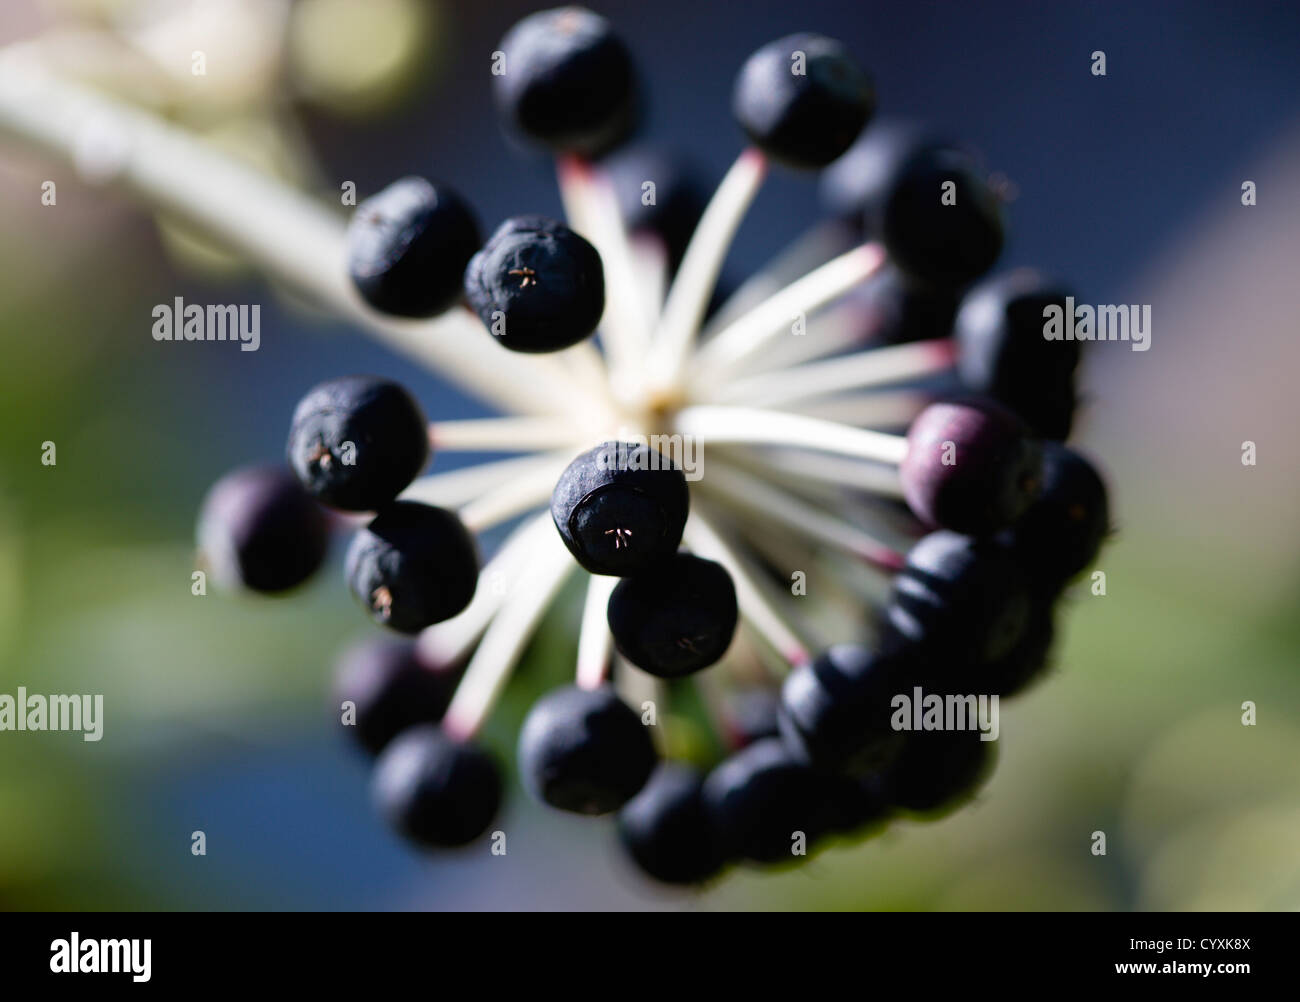 Plants, Shrubs, Fatsia Japonica, Japanese aralia, Black ripe fruit growing in clusters on the branch of the plant. Stock Photo